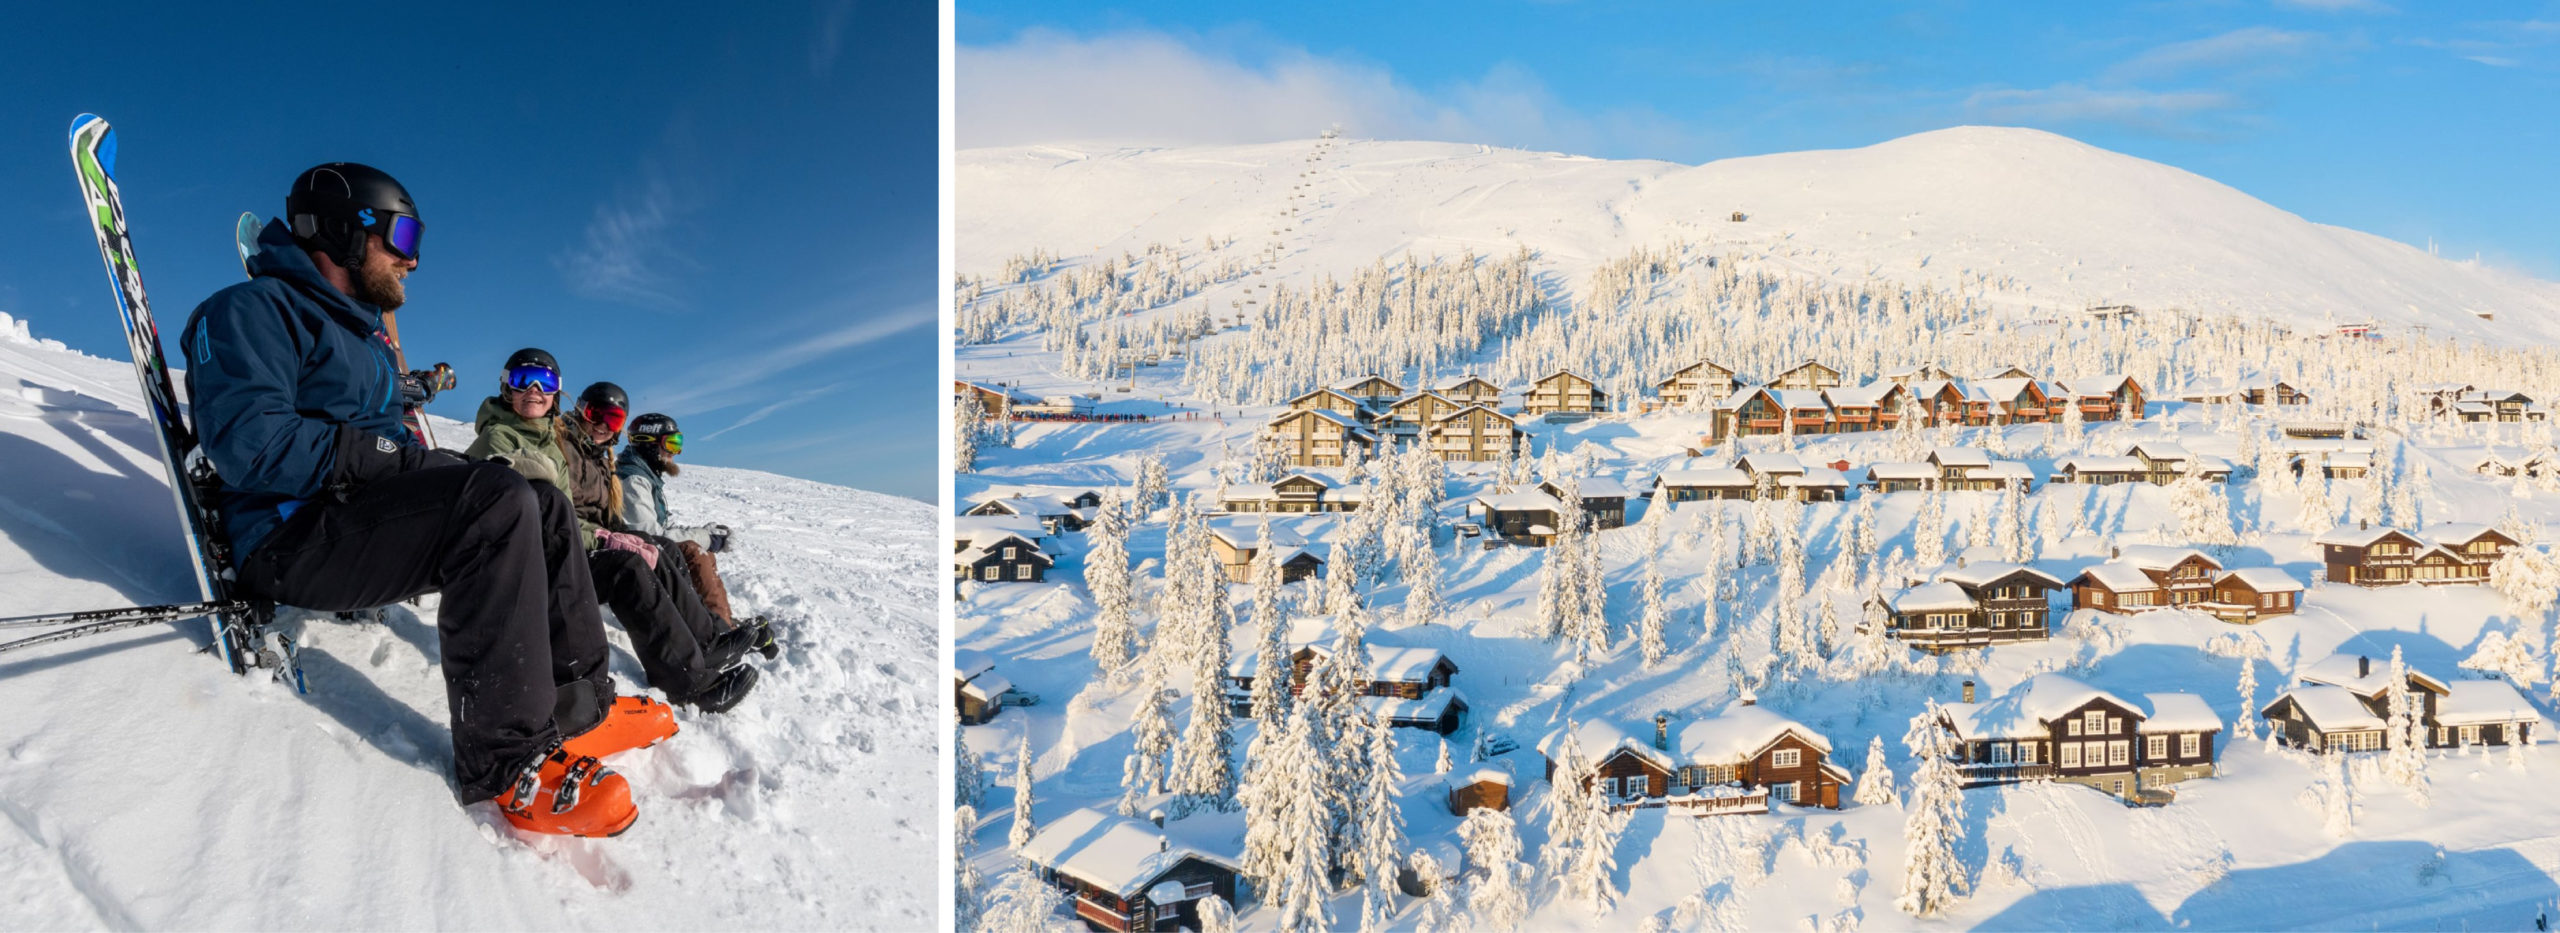 Picture from Trysil: people in the ski slopes and cabins/apartments for rent.